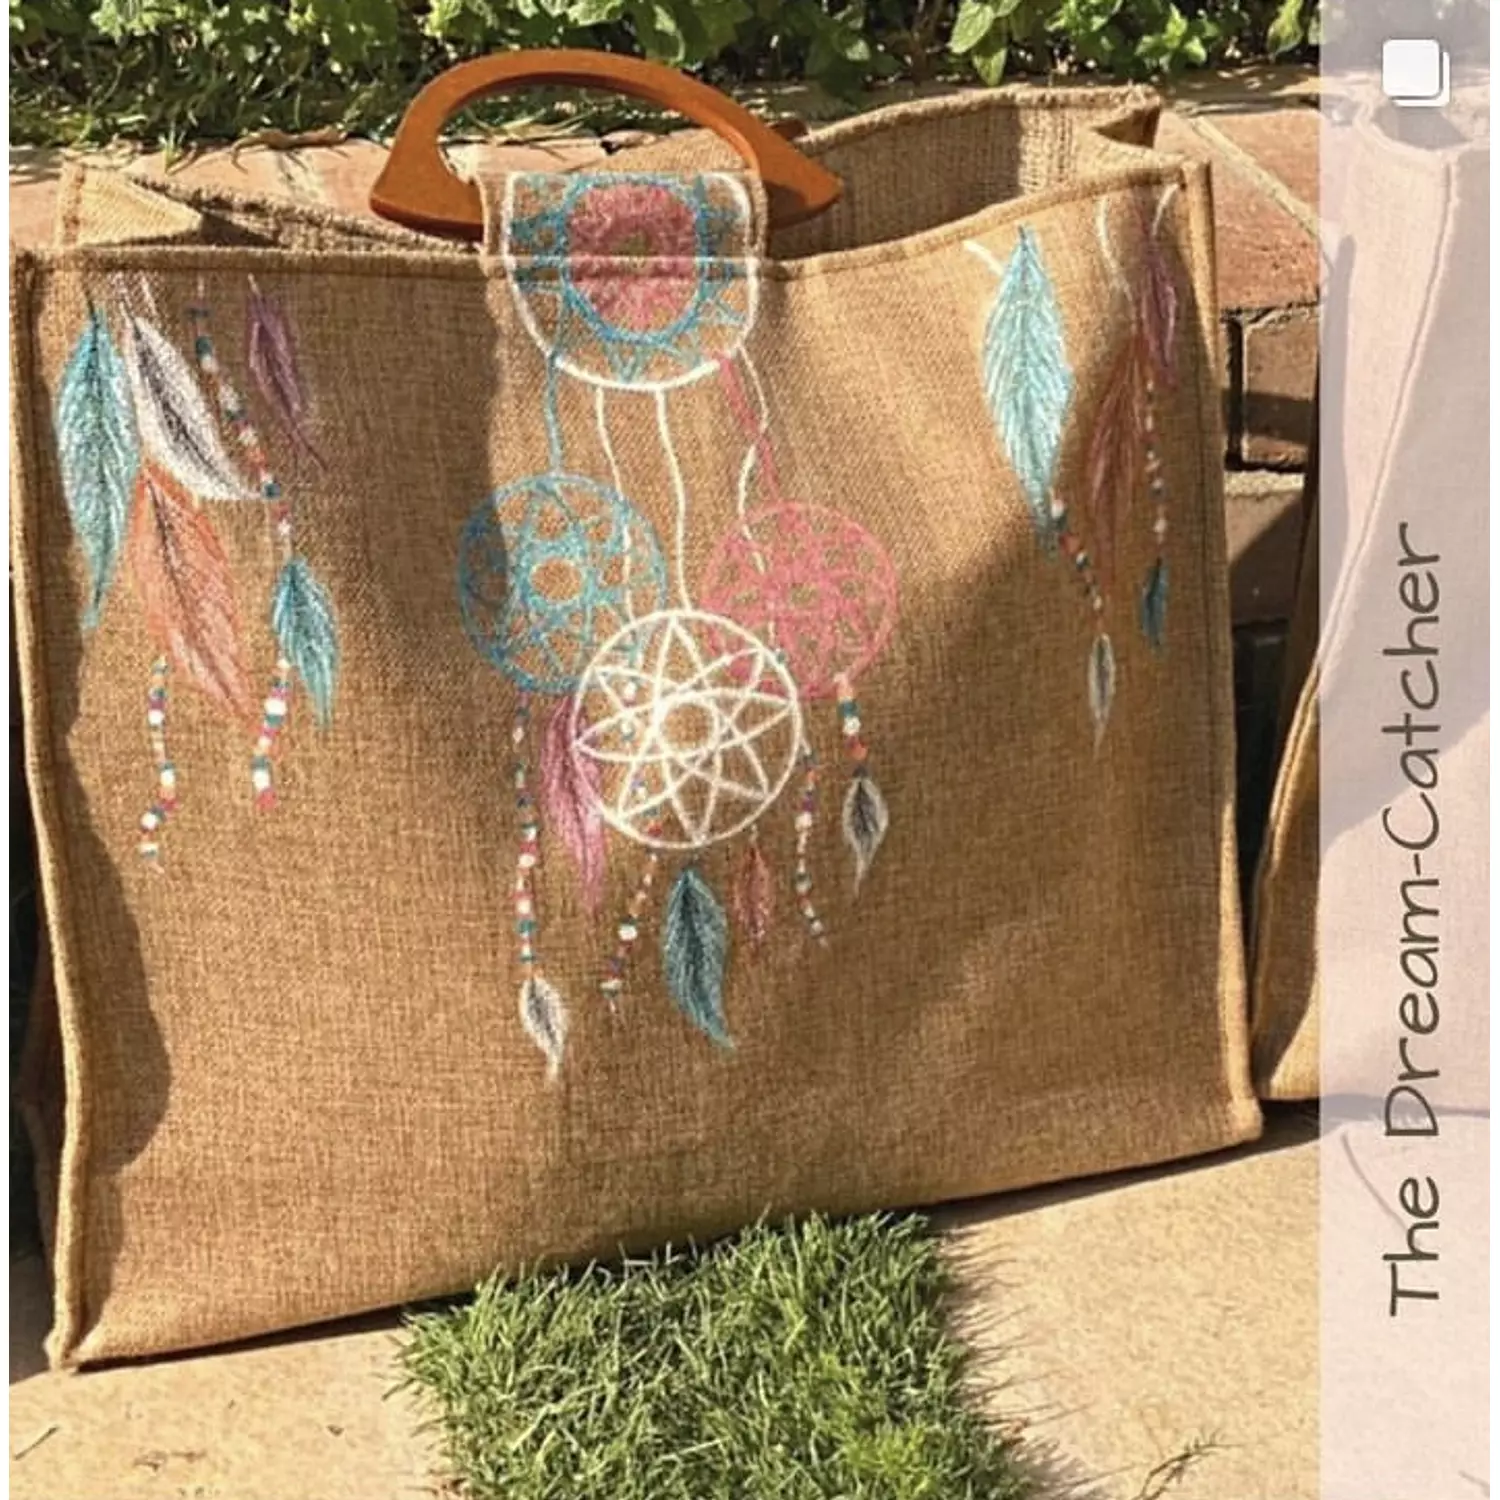 Dream-Catcher Hand-Painted Burlap Tote by Order hover image